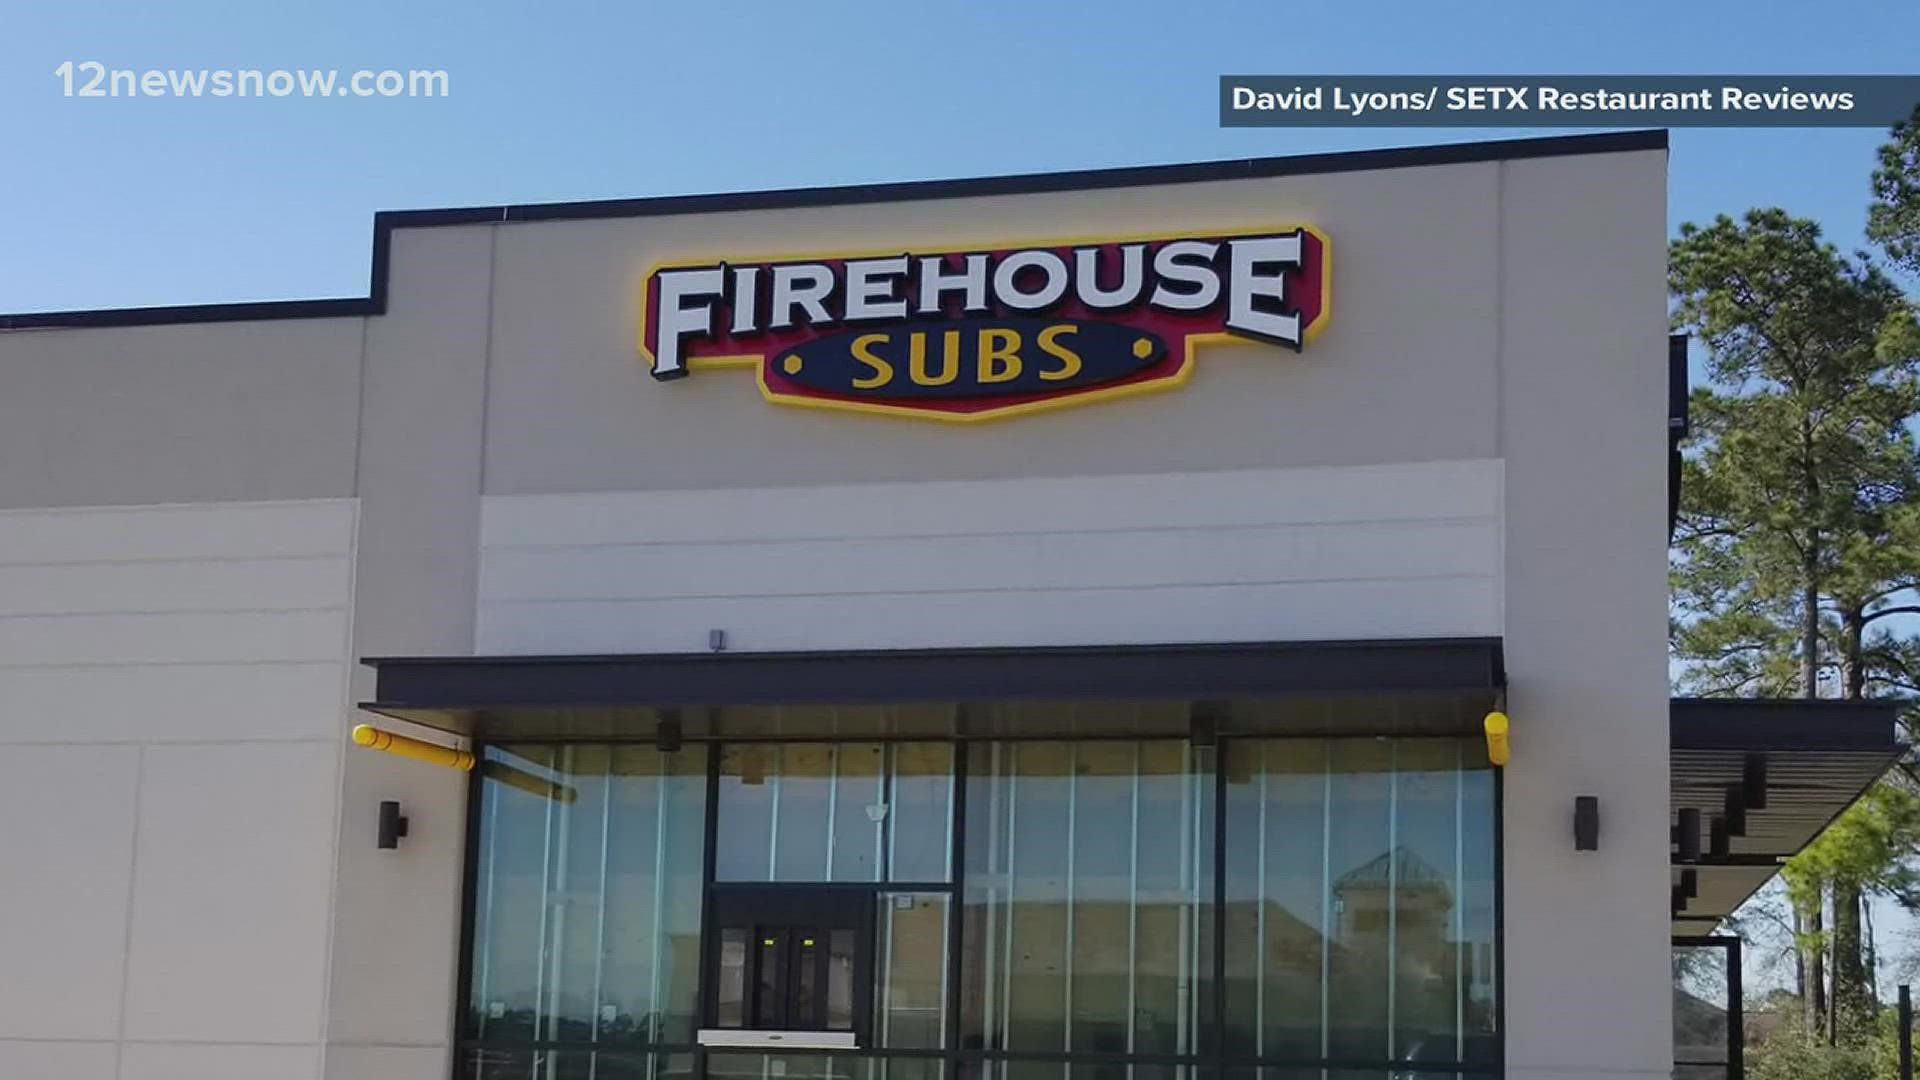 Firehouse Subs has officially opened its first location in Lumberton, which is owned by a Southeast Texas native.